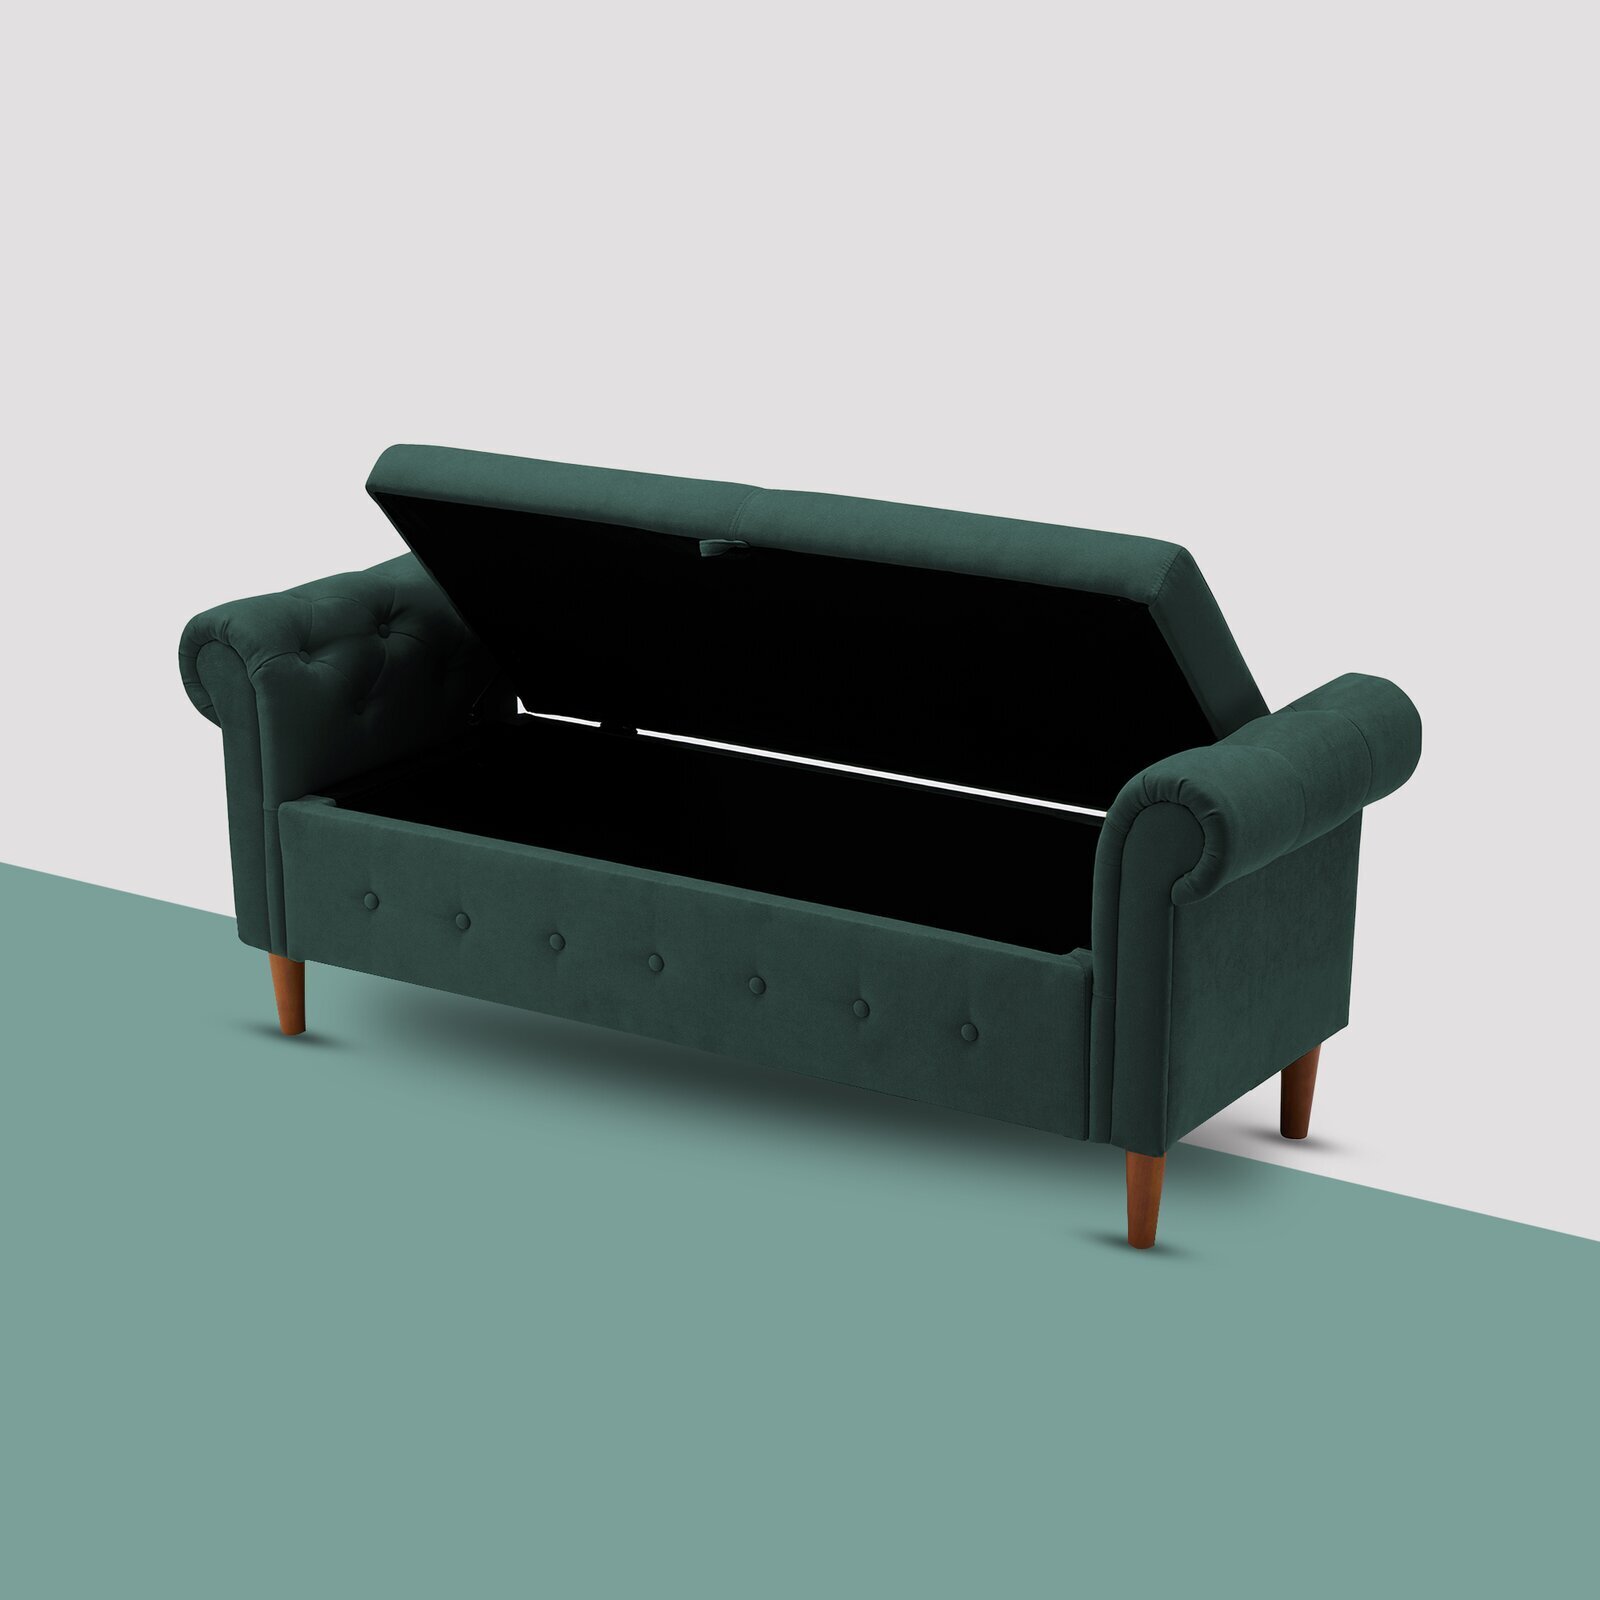 Upholstered Solid Wood Storage Bench With Arms